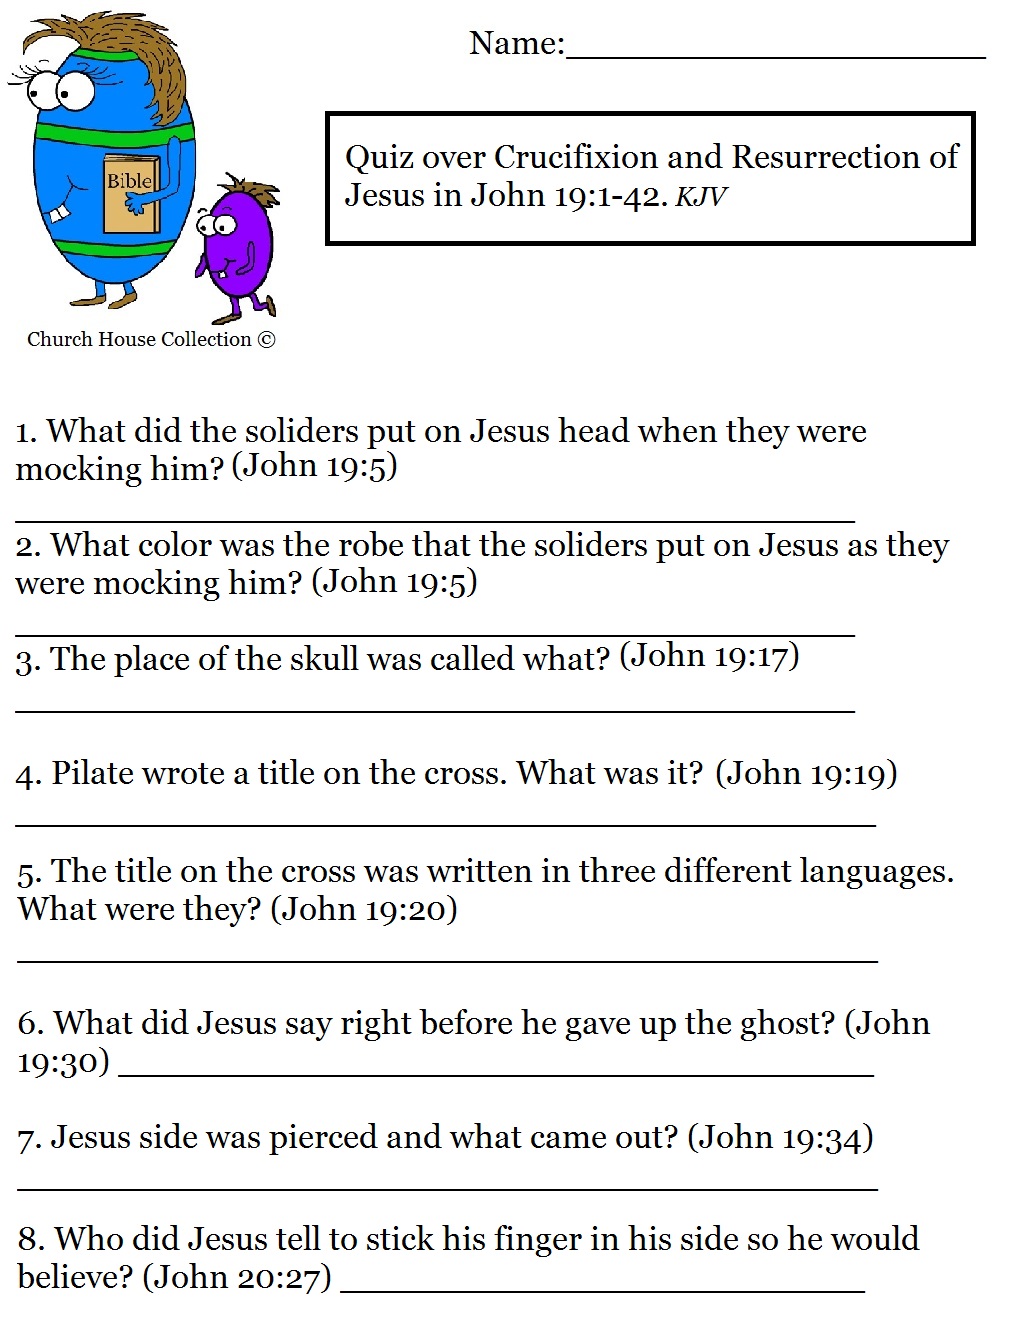 32 fun bible trivia questions kittybabylovecom